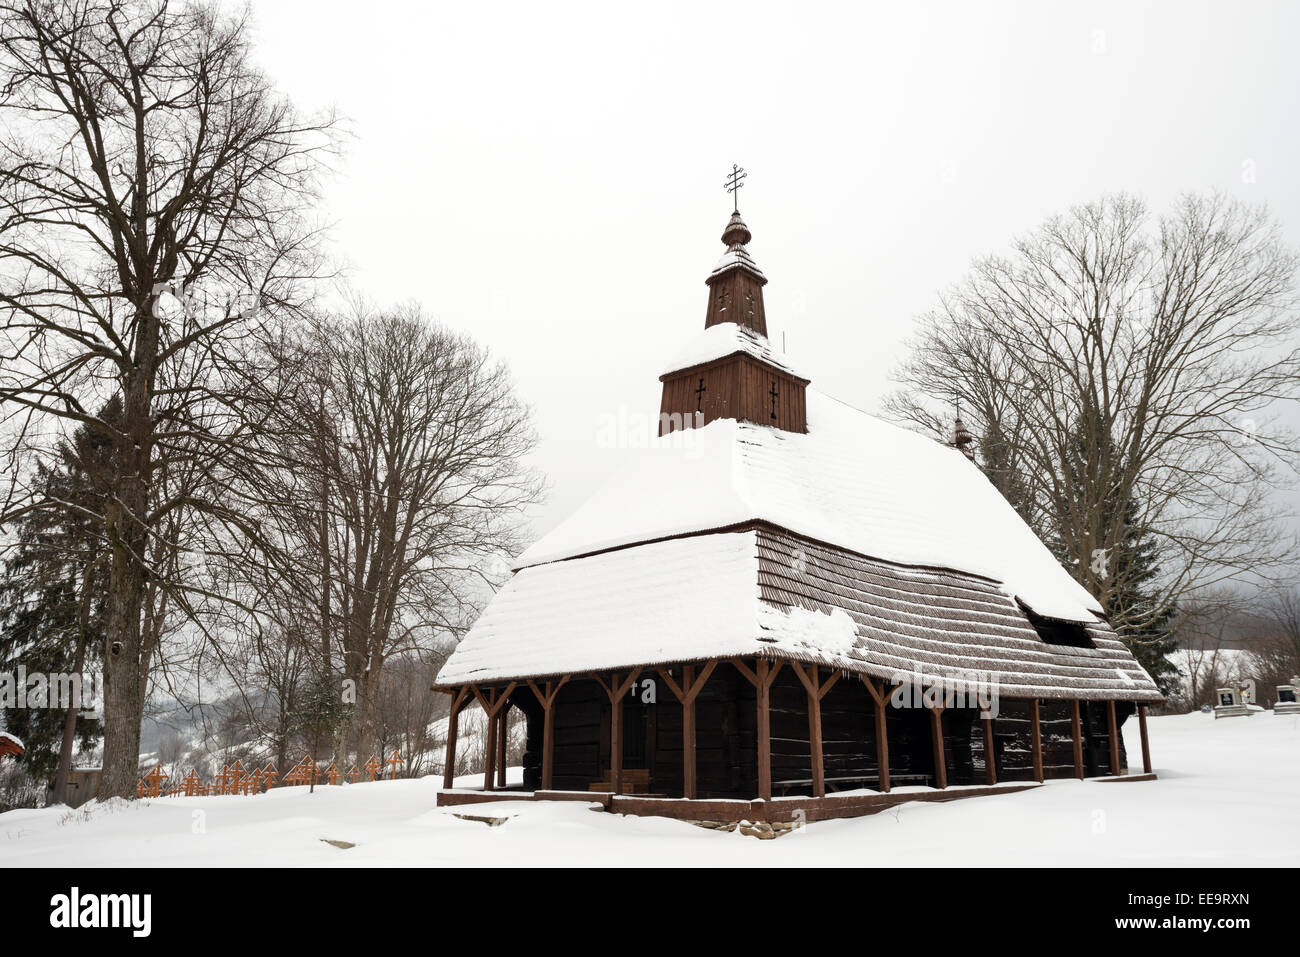 The Greek Catholic wooden church of St Michael the Archangel in Topola, Slovakia covered by snow Stock Photo